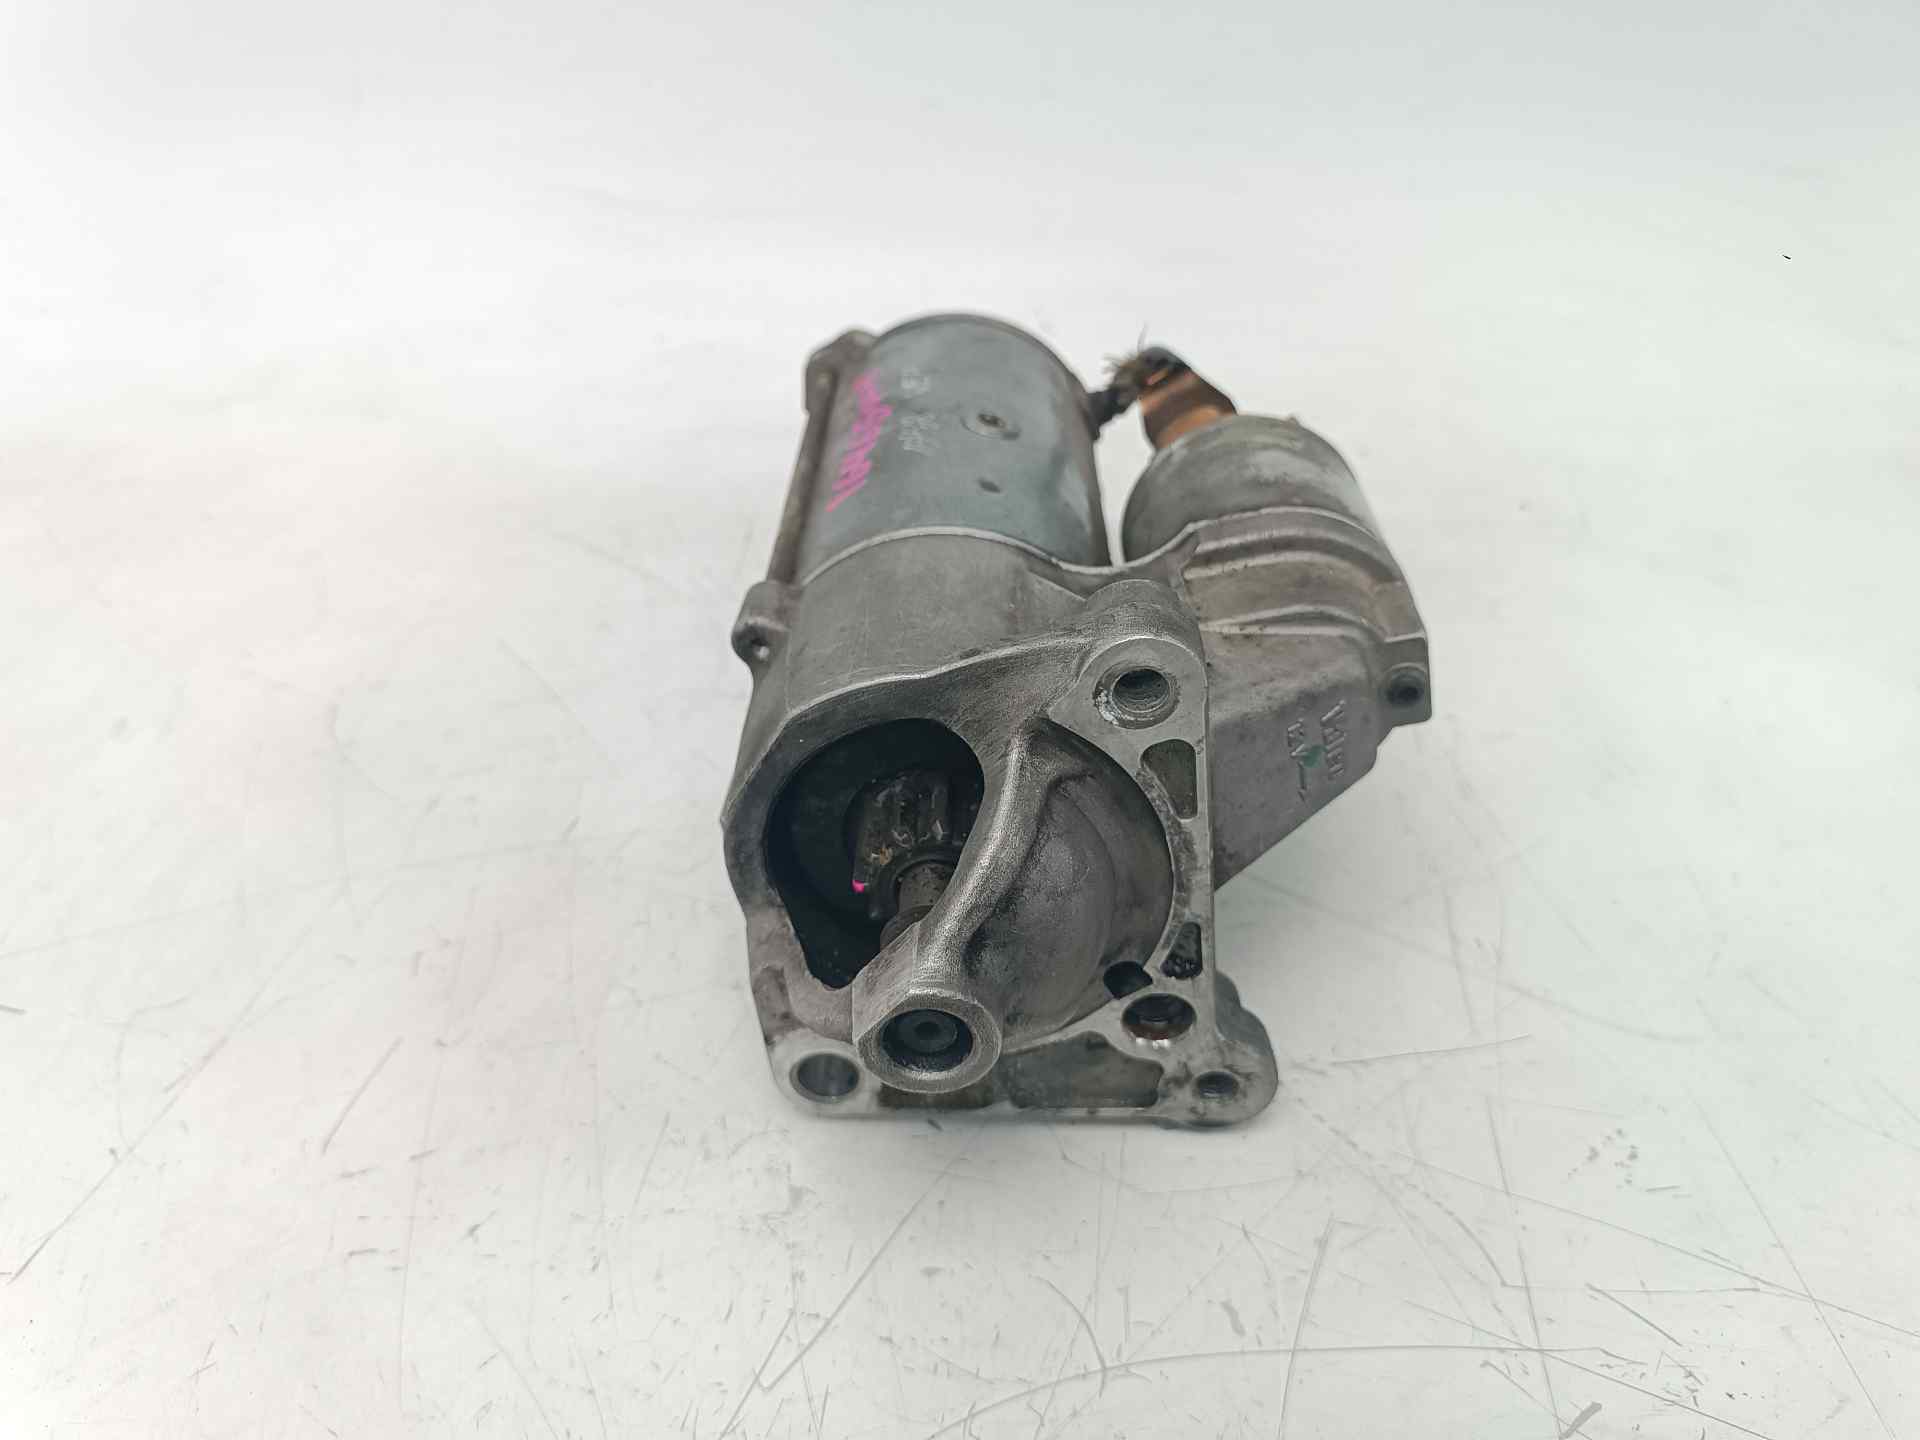 RENAULT Scenic 2 generation (2003-2010) Starteris 8200628419, 8200628419, 18A80068NG 23748311